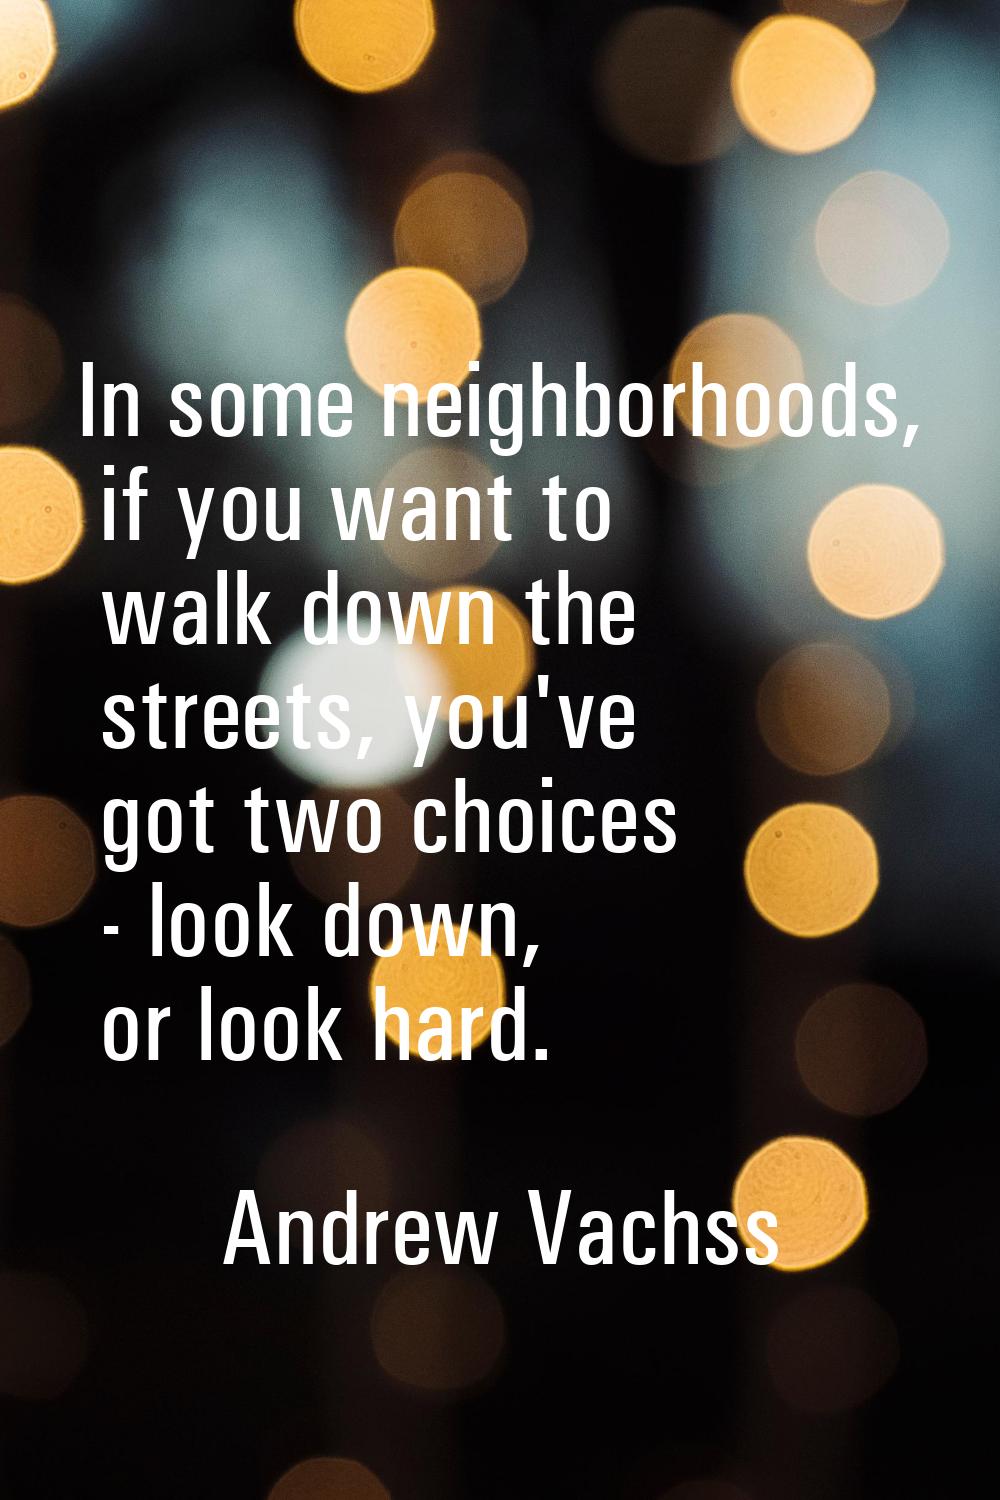 In some neighborhoods, if you want to walk down the streets, you've got two choices - look down, or